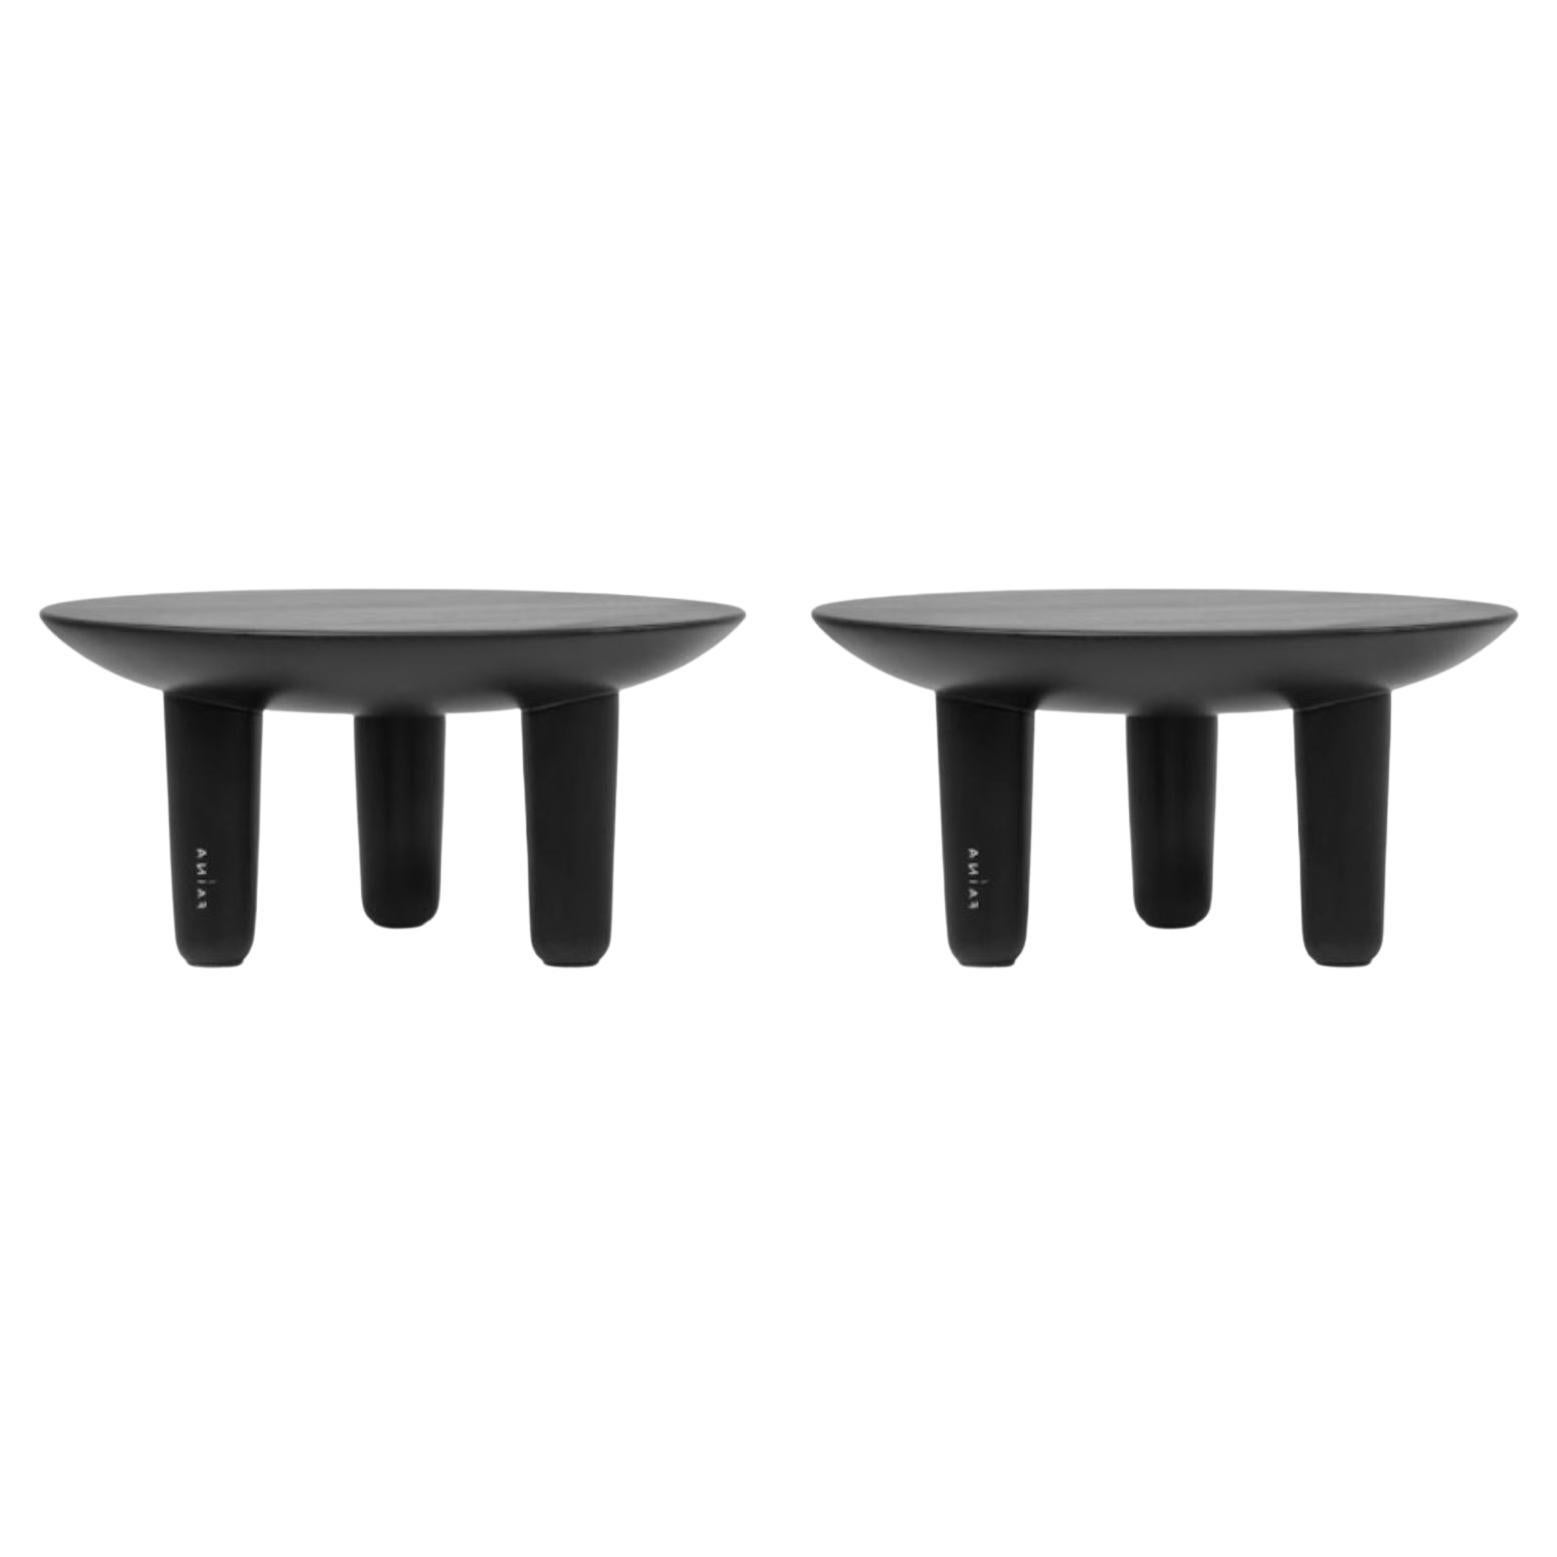 Set of 2 Ash Contemporary Coffee Tables by Faina